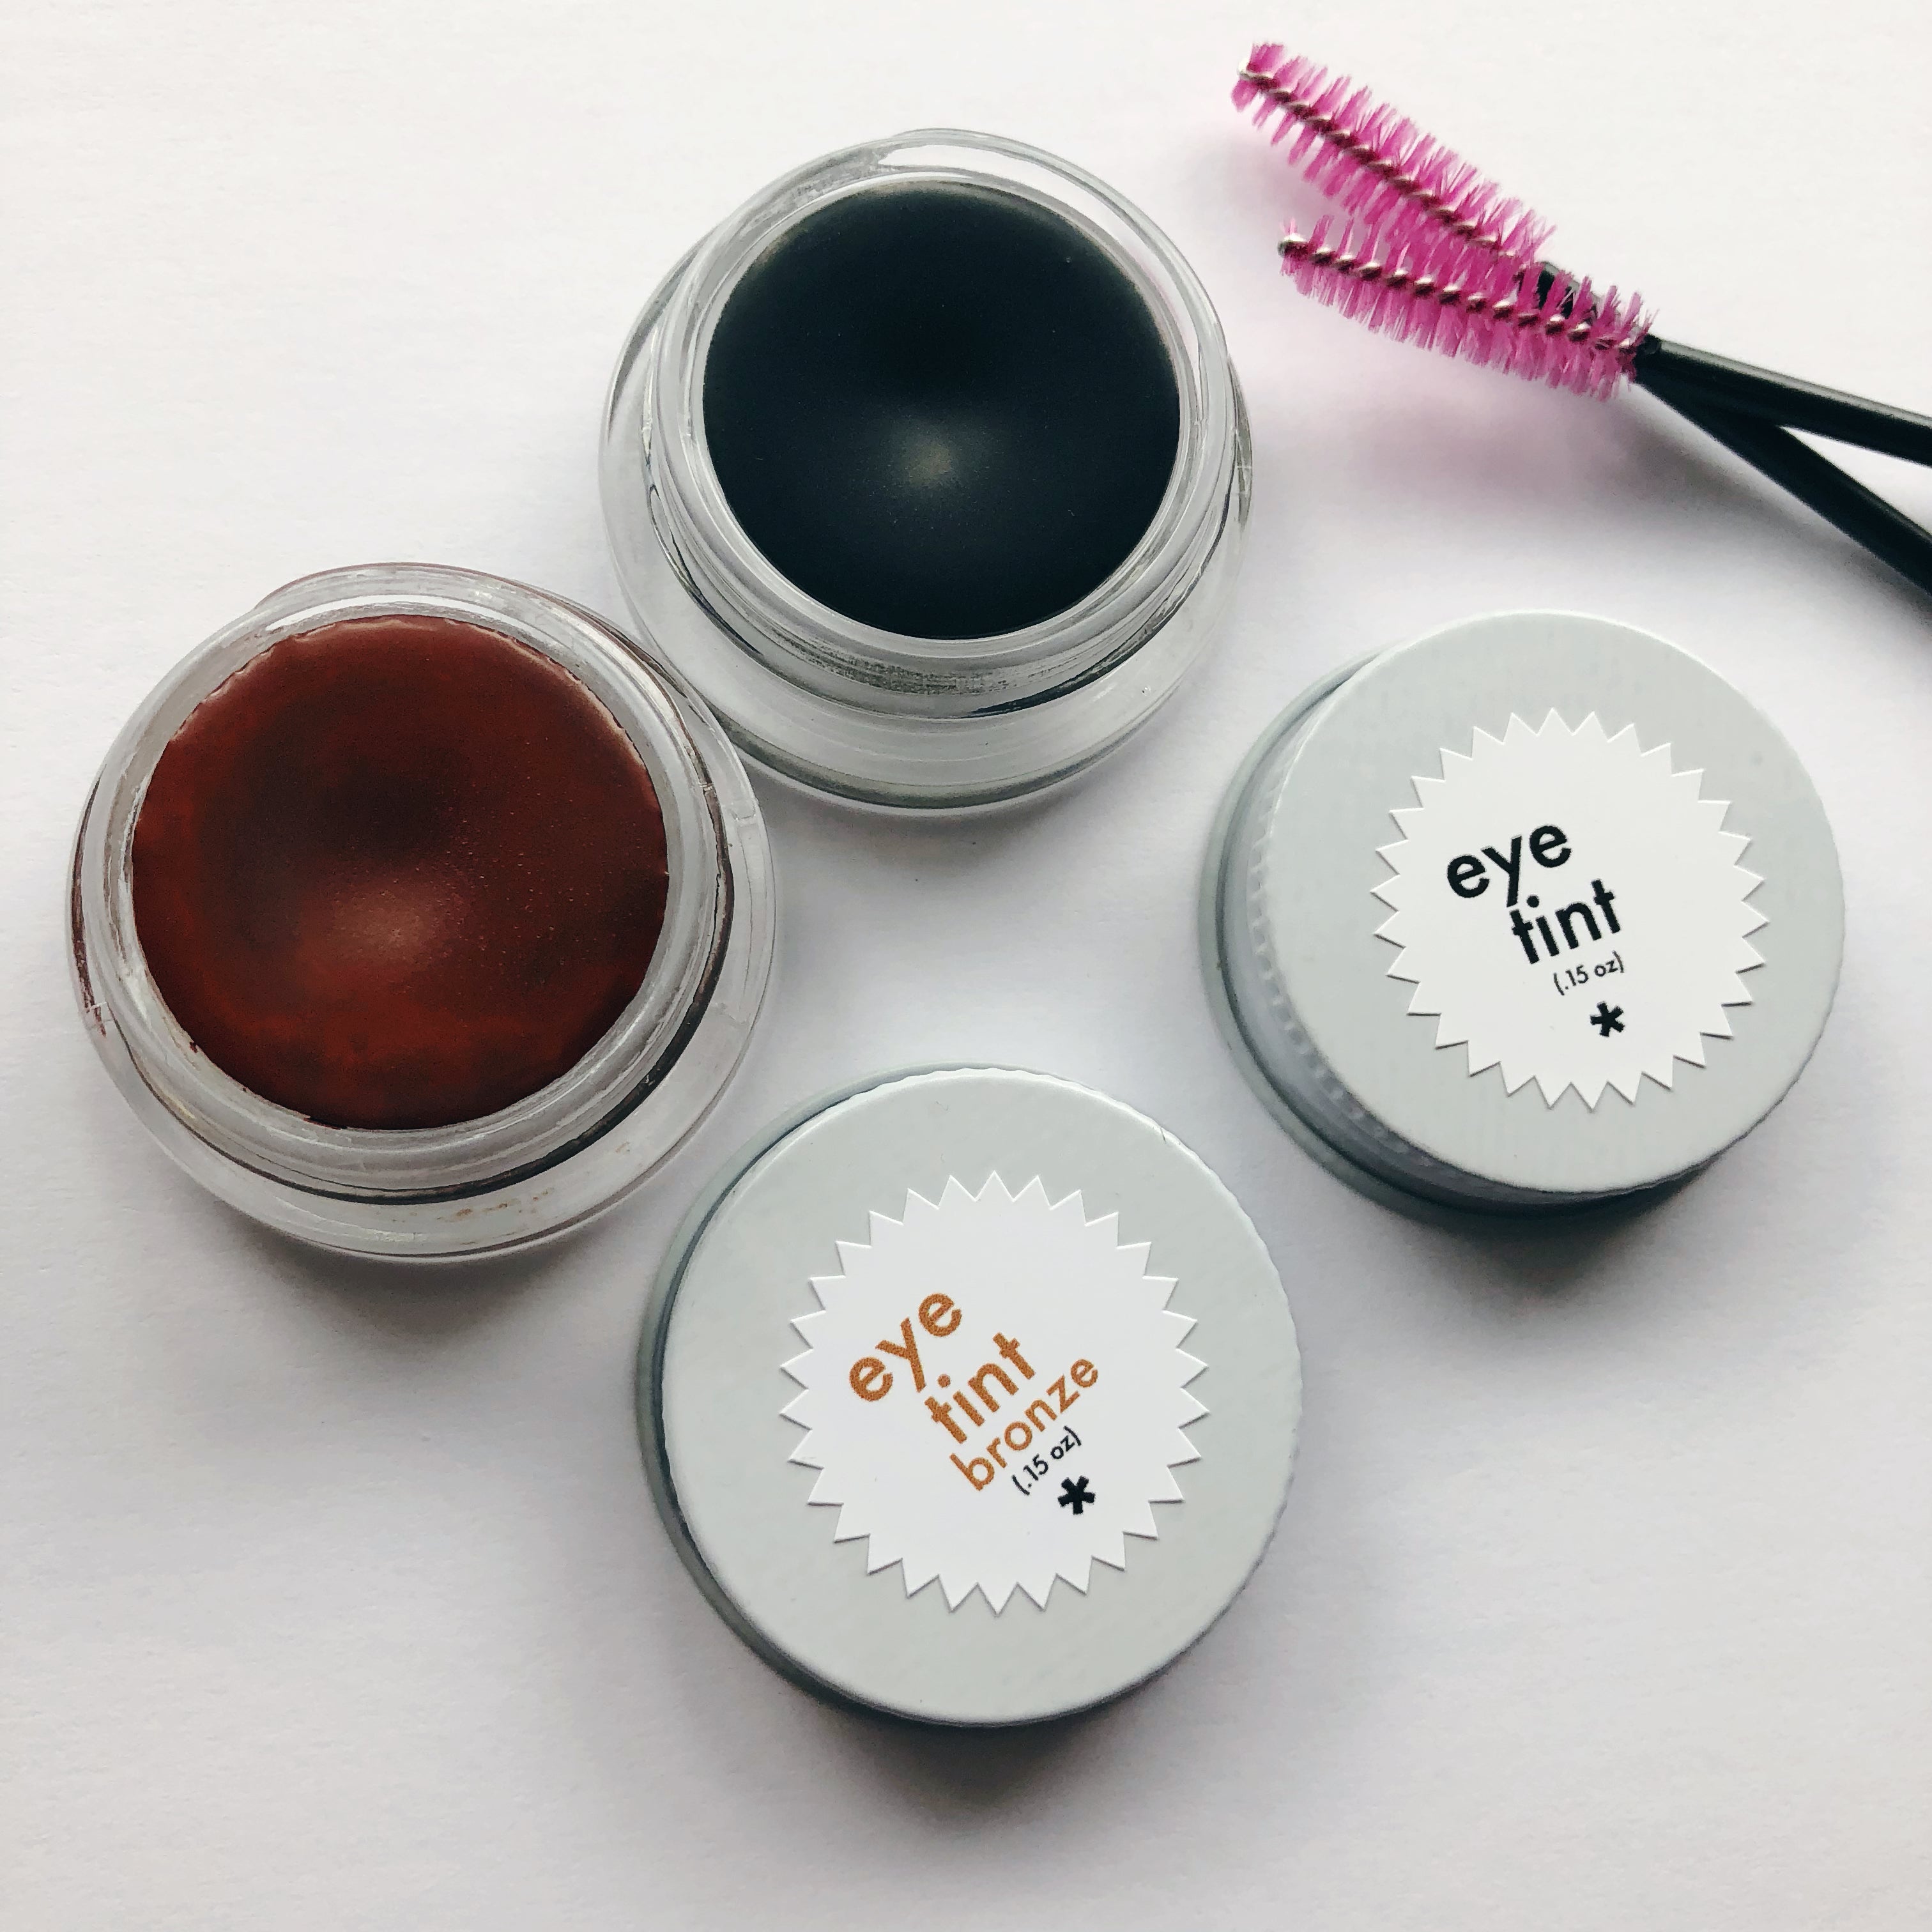 Everything You Need to Know About Eye Tint!